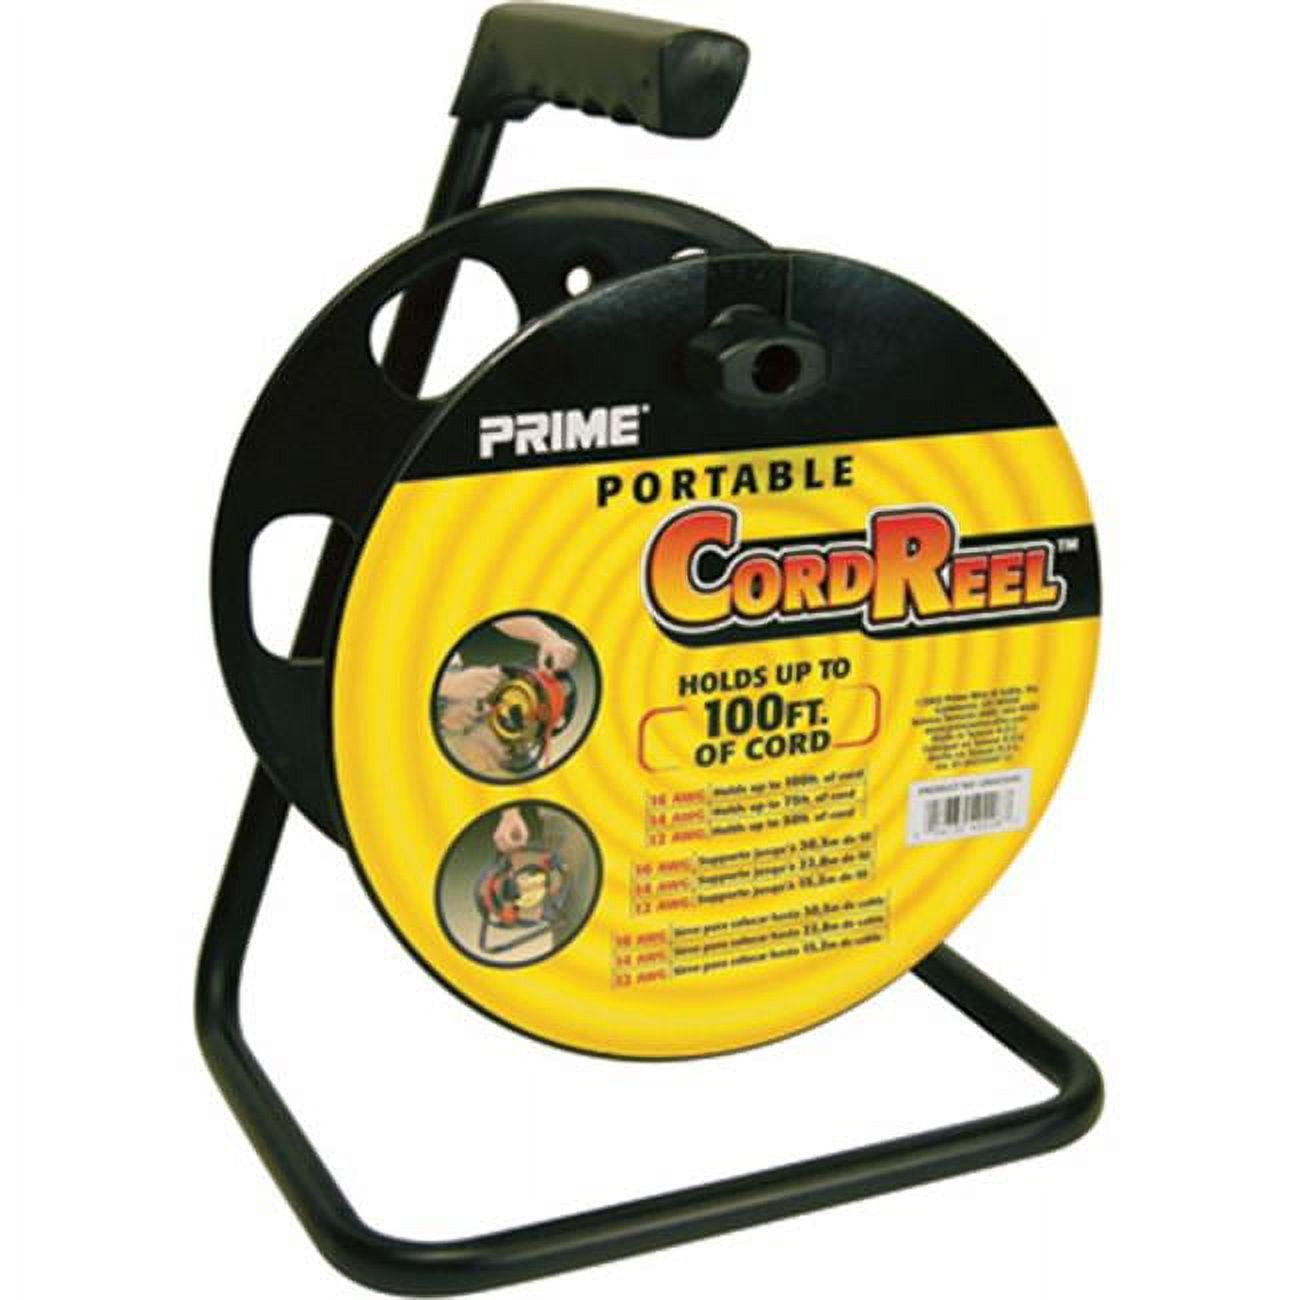 Prime 162532 Wire & Cable Portable Cord Reel Storage with Metal Stand -  Model No. CR003000 